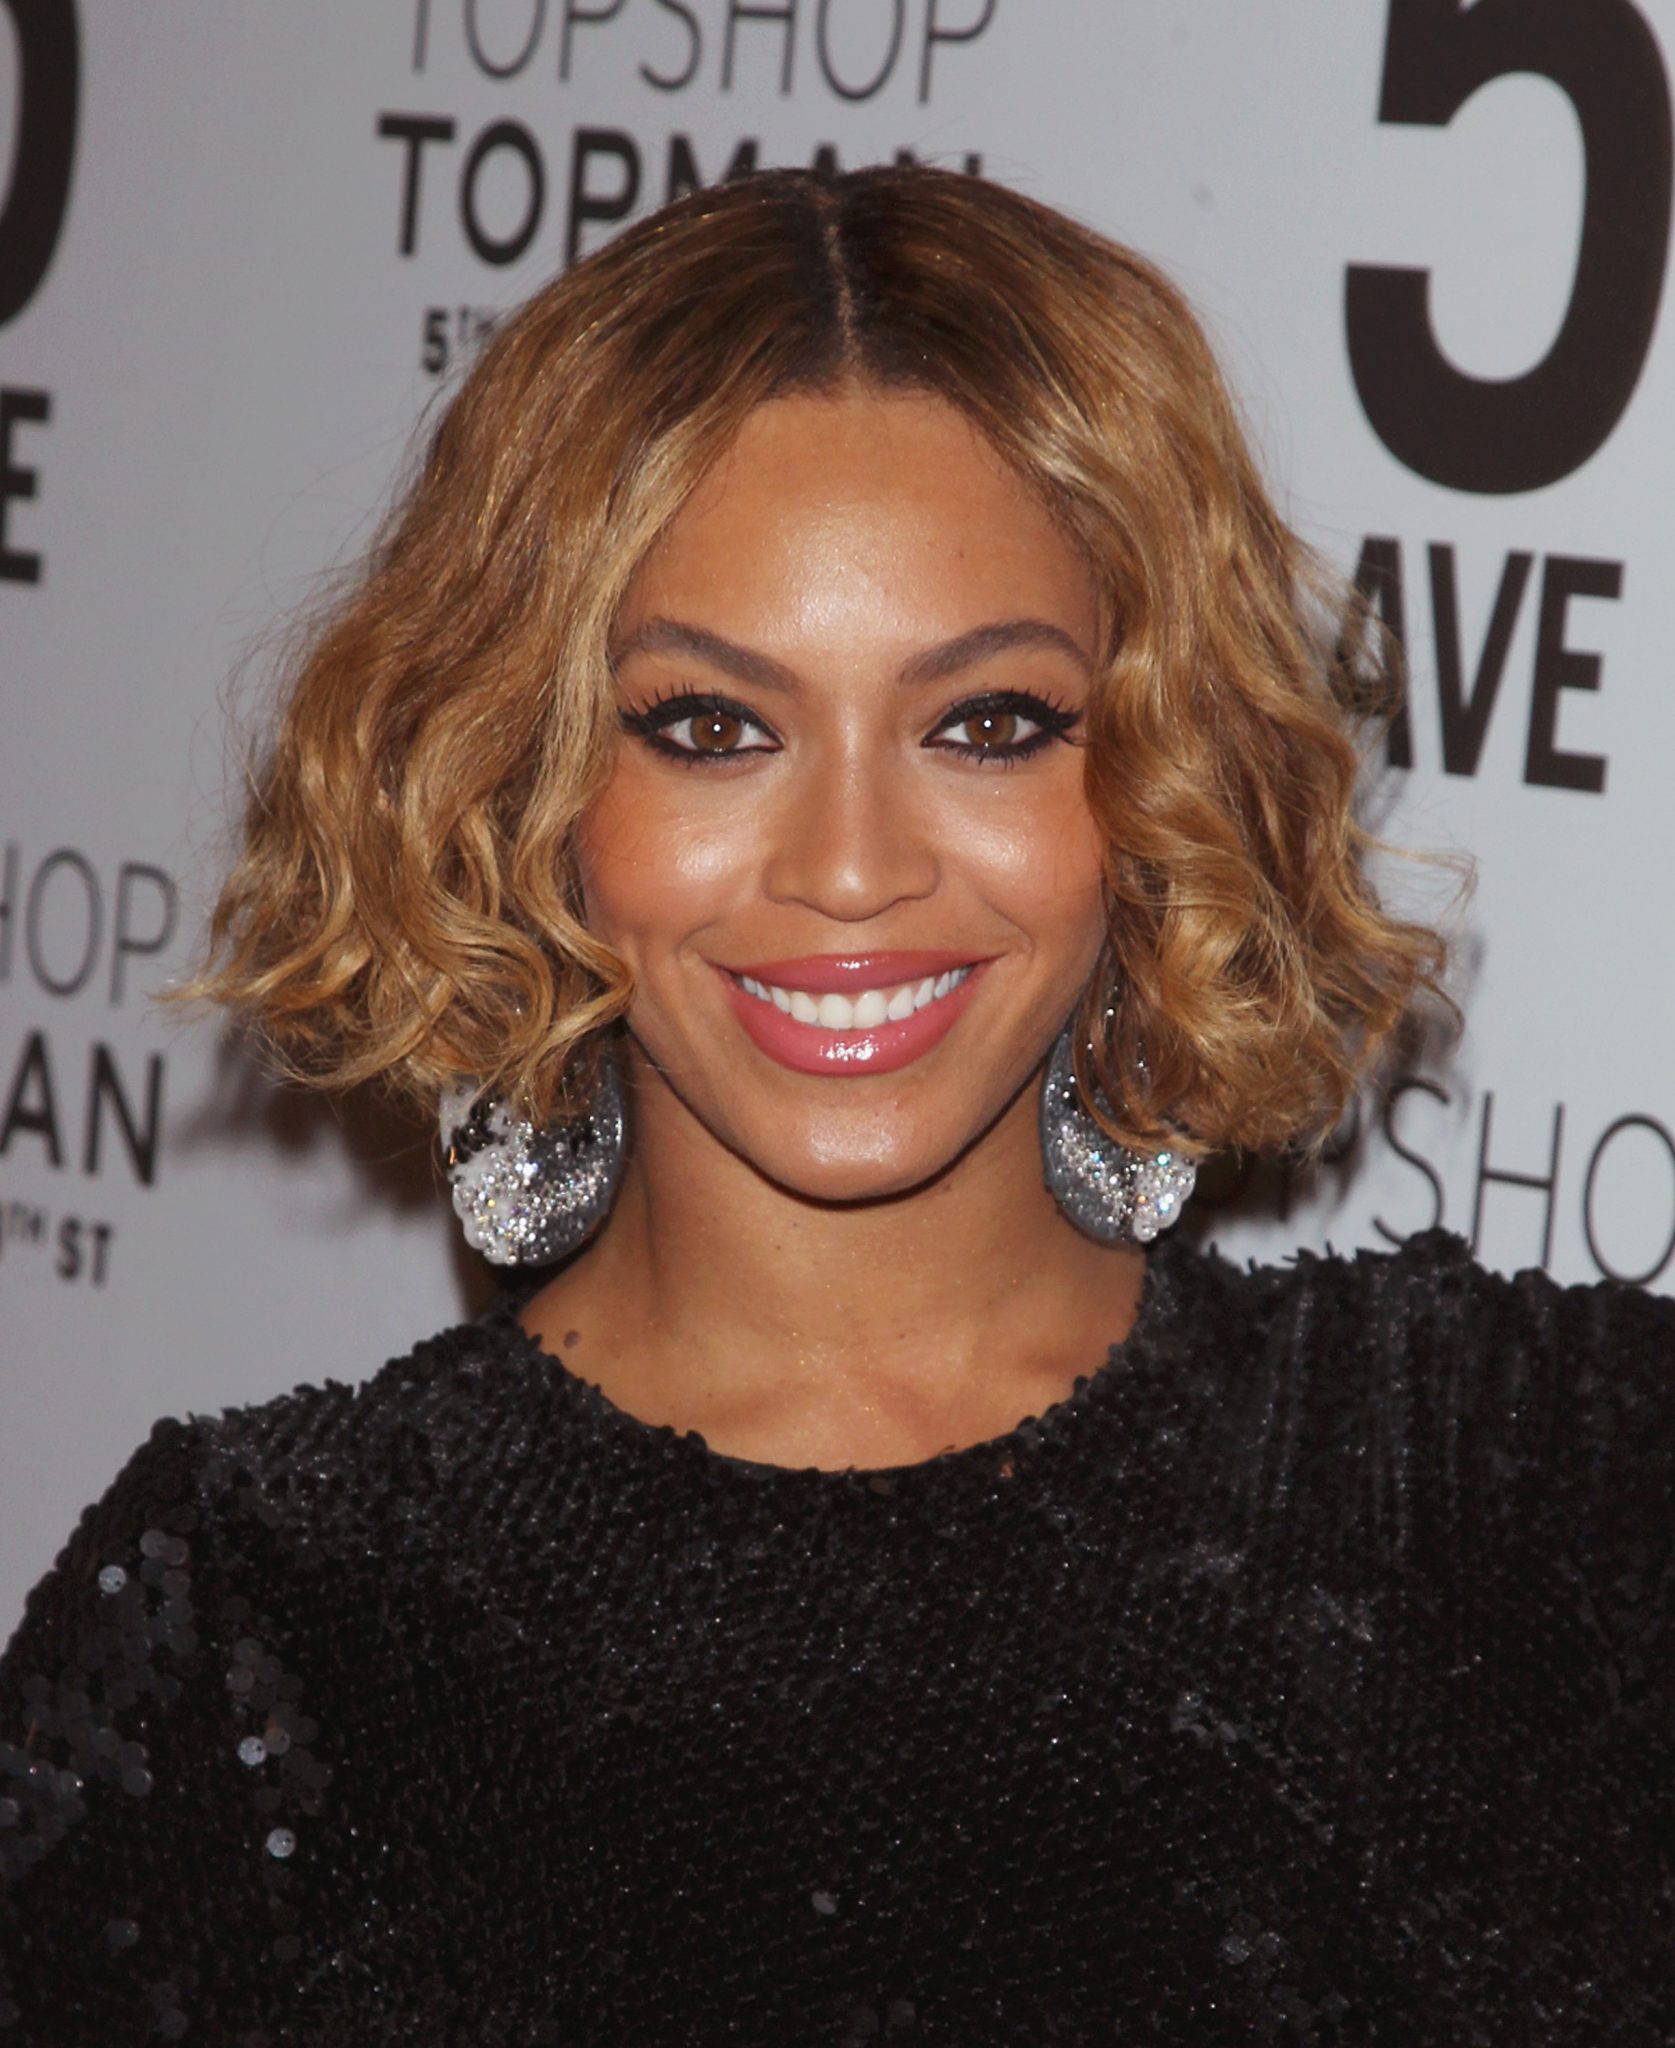 NEW YORK, NY - NOVEMBER 04:  Singer Beyonce Knowles attend the Topshop Topman New York City Flagship Opening Dinner at Grand Central Terminal on November 4, 2014 in New York City.  (Photo by Jim Spellman/WireImage)